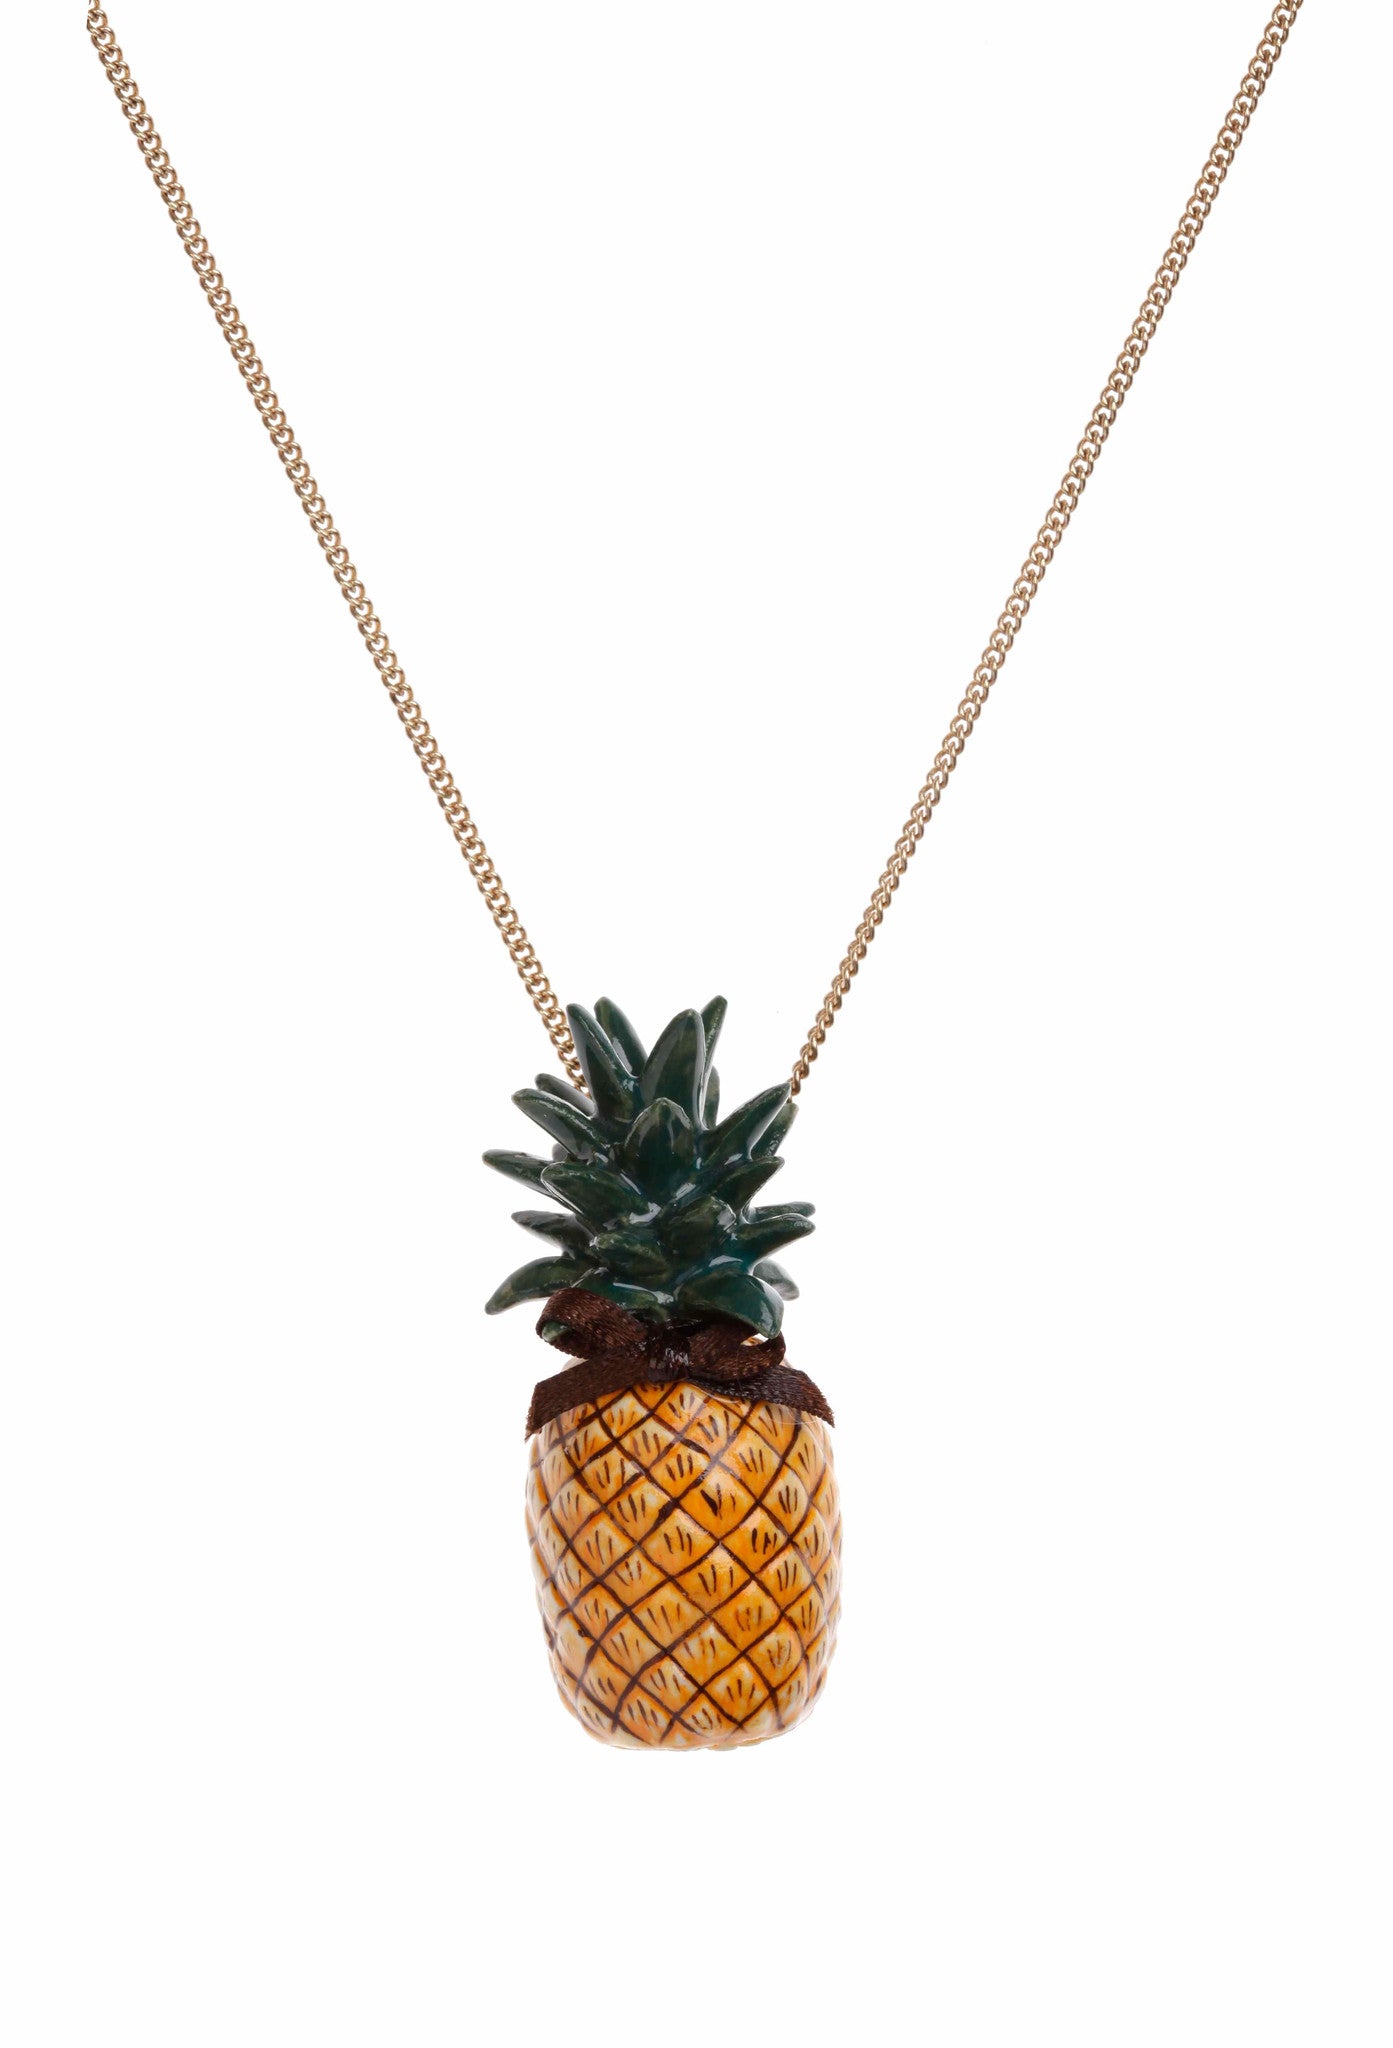 Spring Sale - Pineapple Necklace